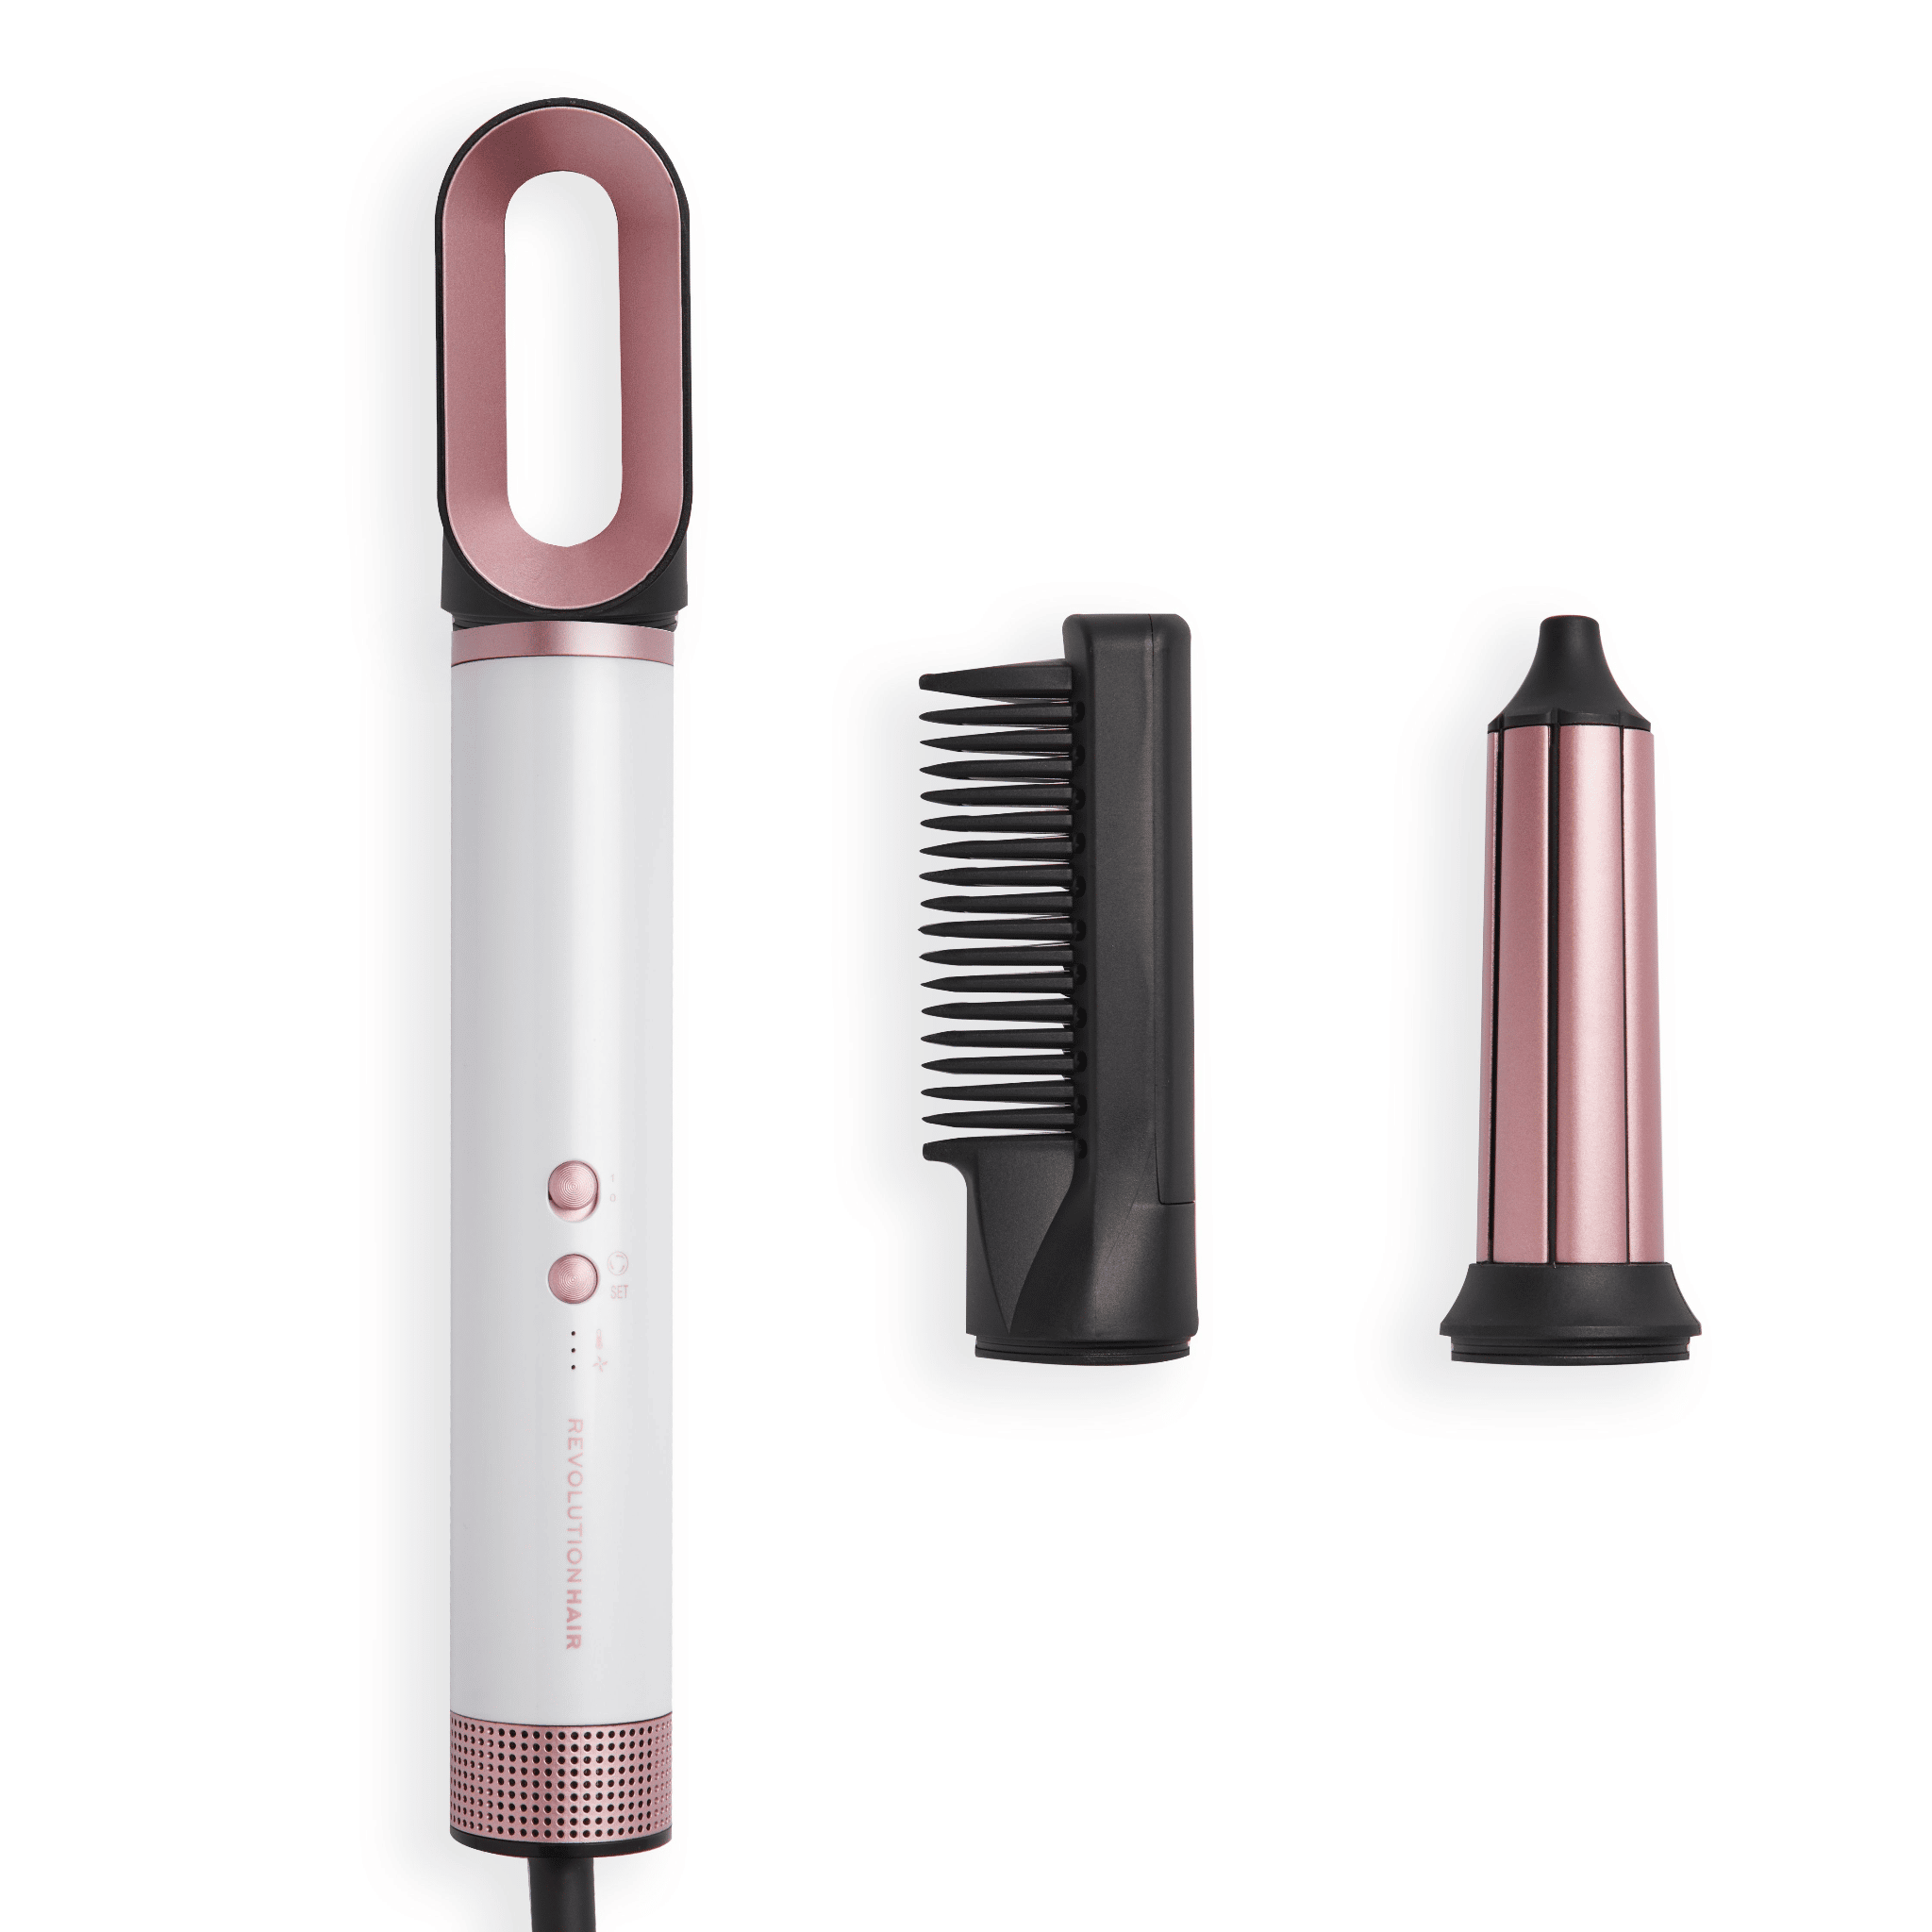 The Revolution hair wrap features a vent dryer, wrap dryer and straight brush dryer.